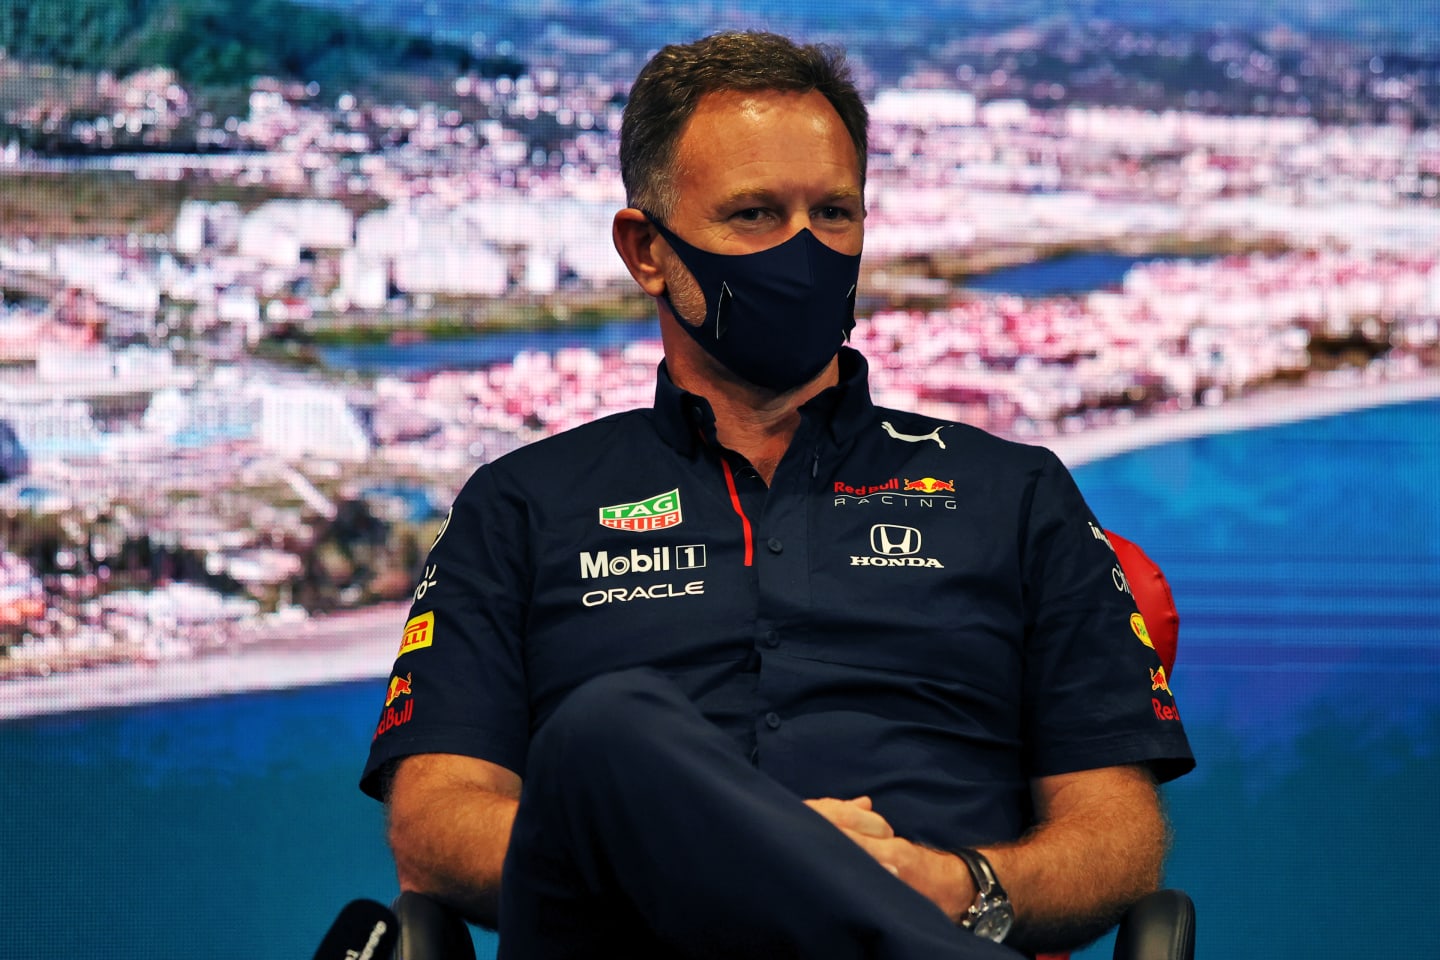 SOCHI, RUSSIA - SEPTEMBER 24: Red Bull Racing Team Principal Christian Horner talks in the Team Principals Press Conference during practice ahead of the F1 Grand Prix of Russia at Sochi Autodrom on September 24, 2021 in Sochi, Russia. (Photo by XPB - Pool/Getty Images)